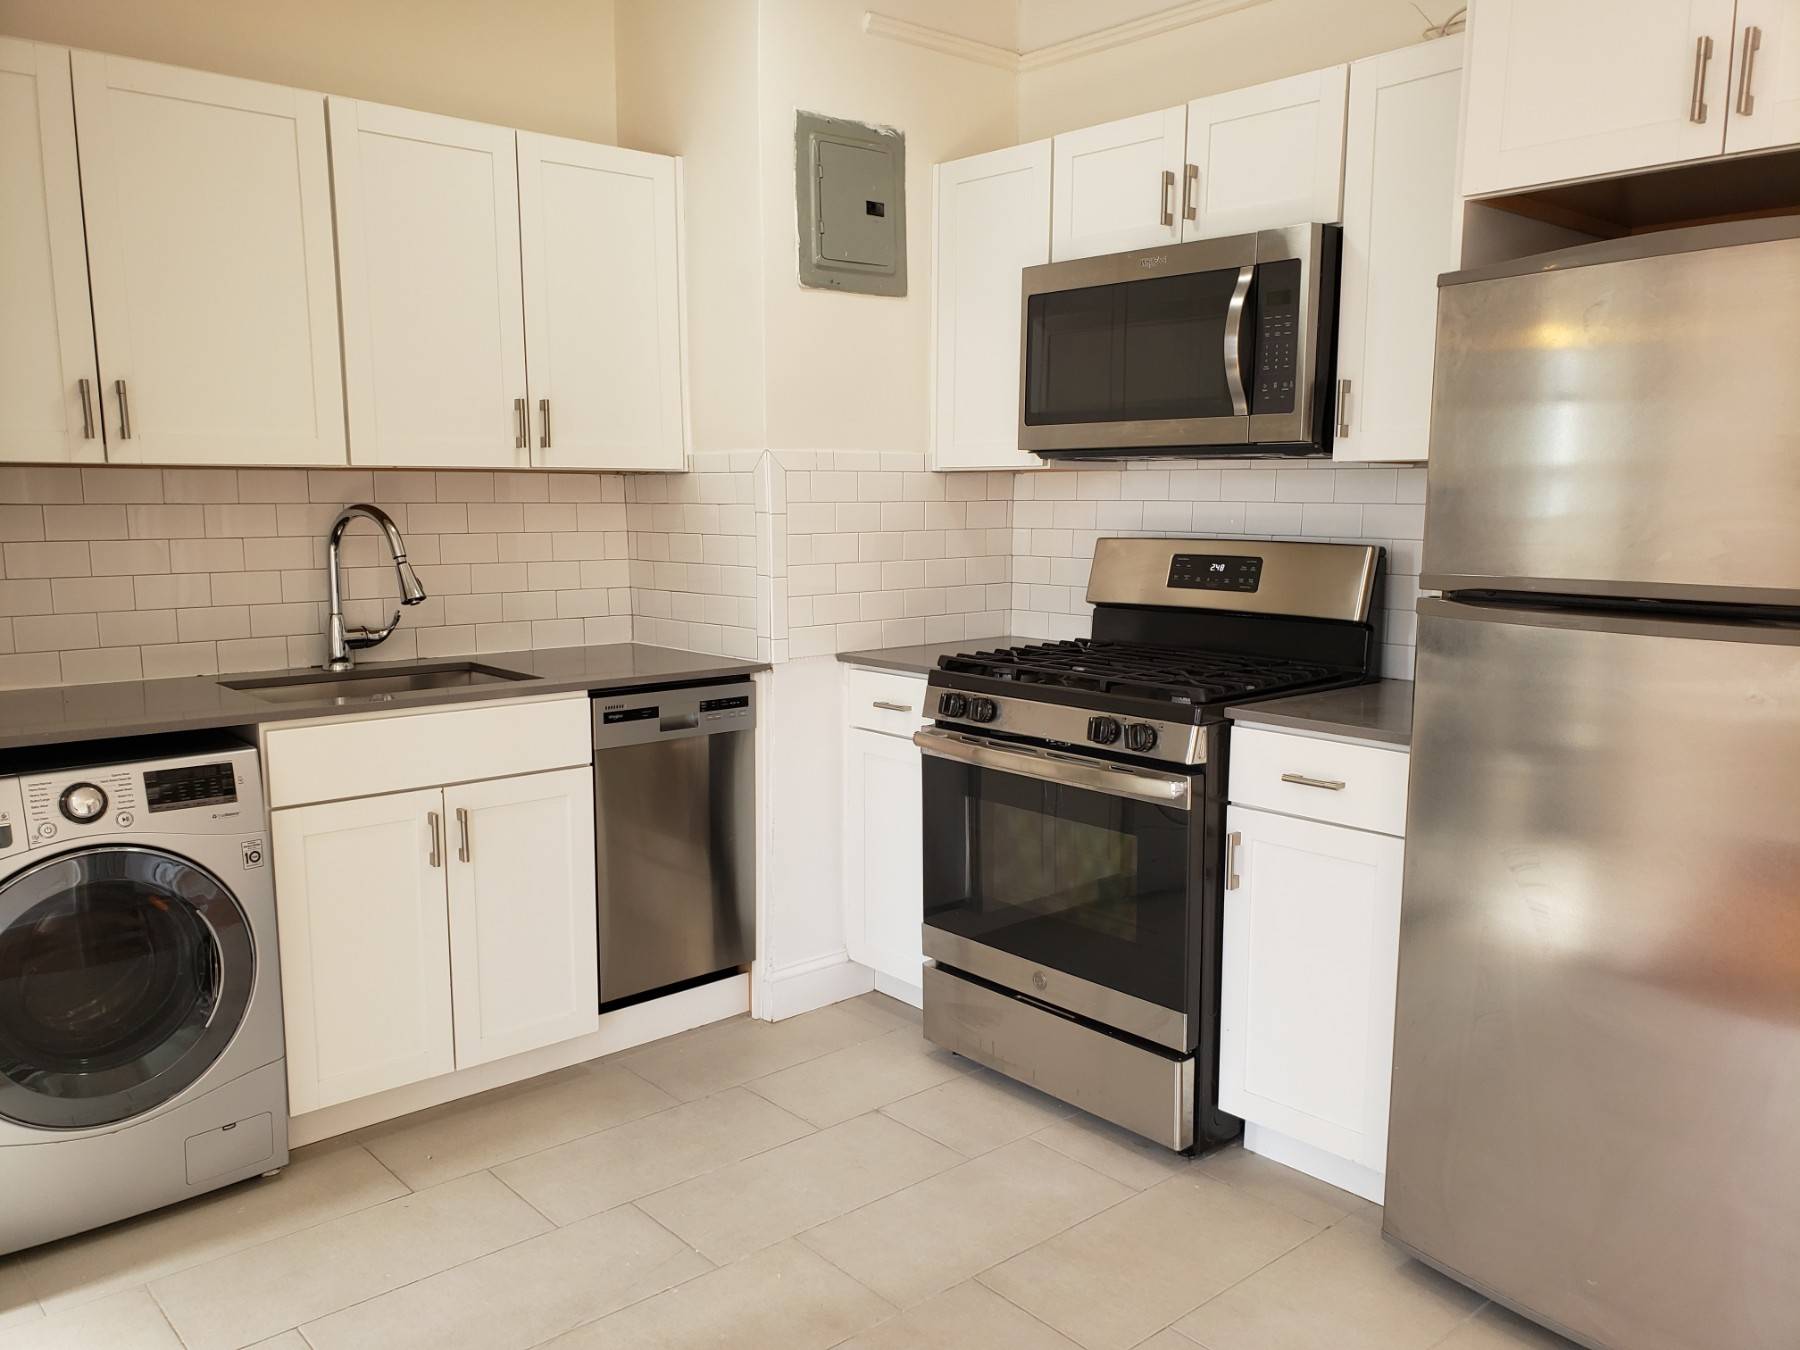 Just In ! Gut renovated Astoria 1 bedroom with washer dryer !